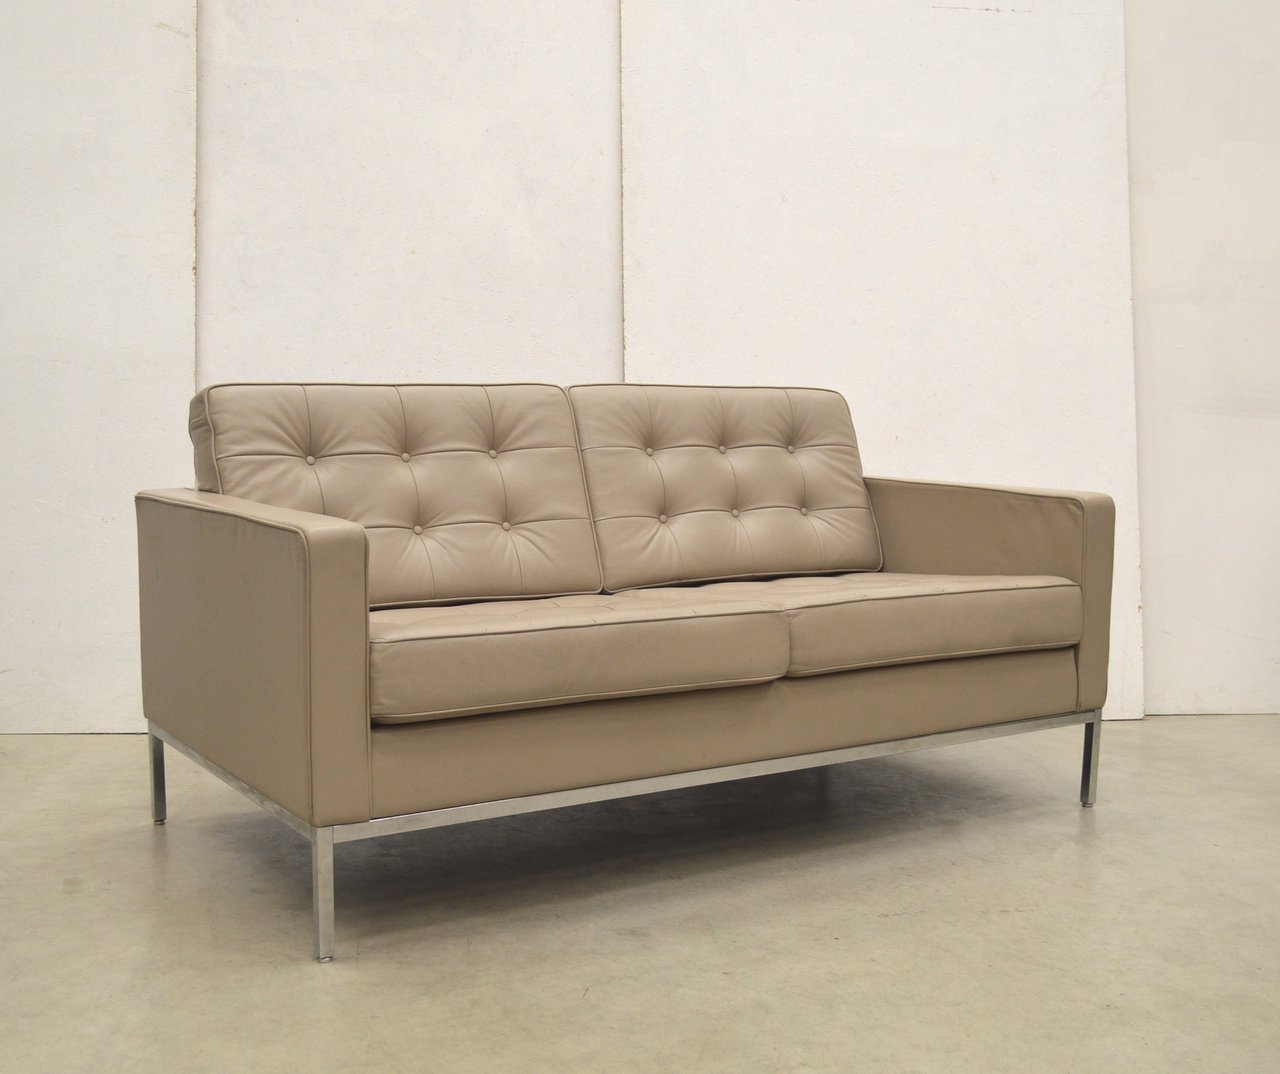 Florence Knoll Relax Sofa Sand Beige Leather by Knoll Studio